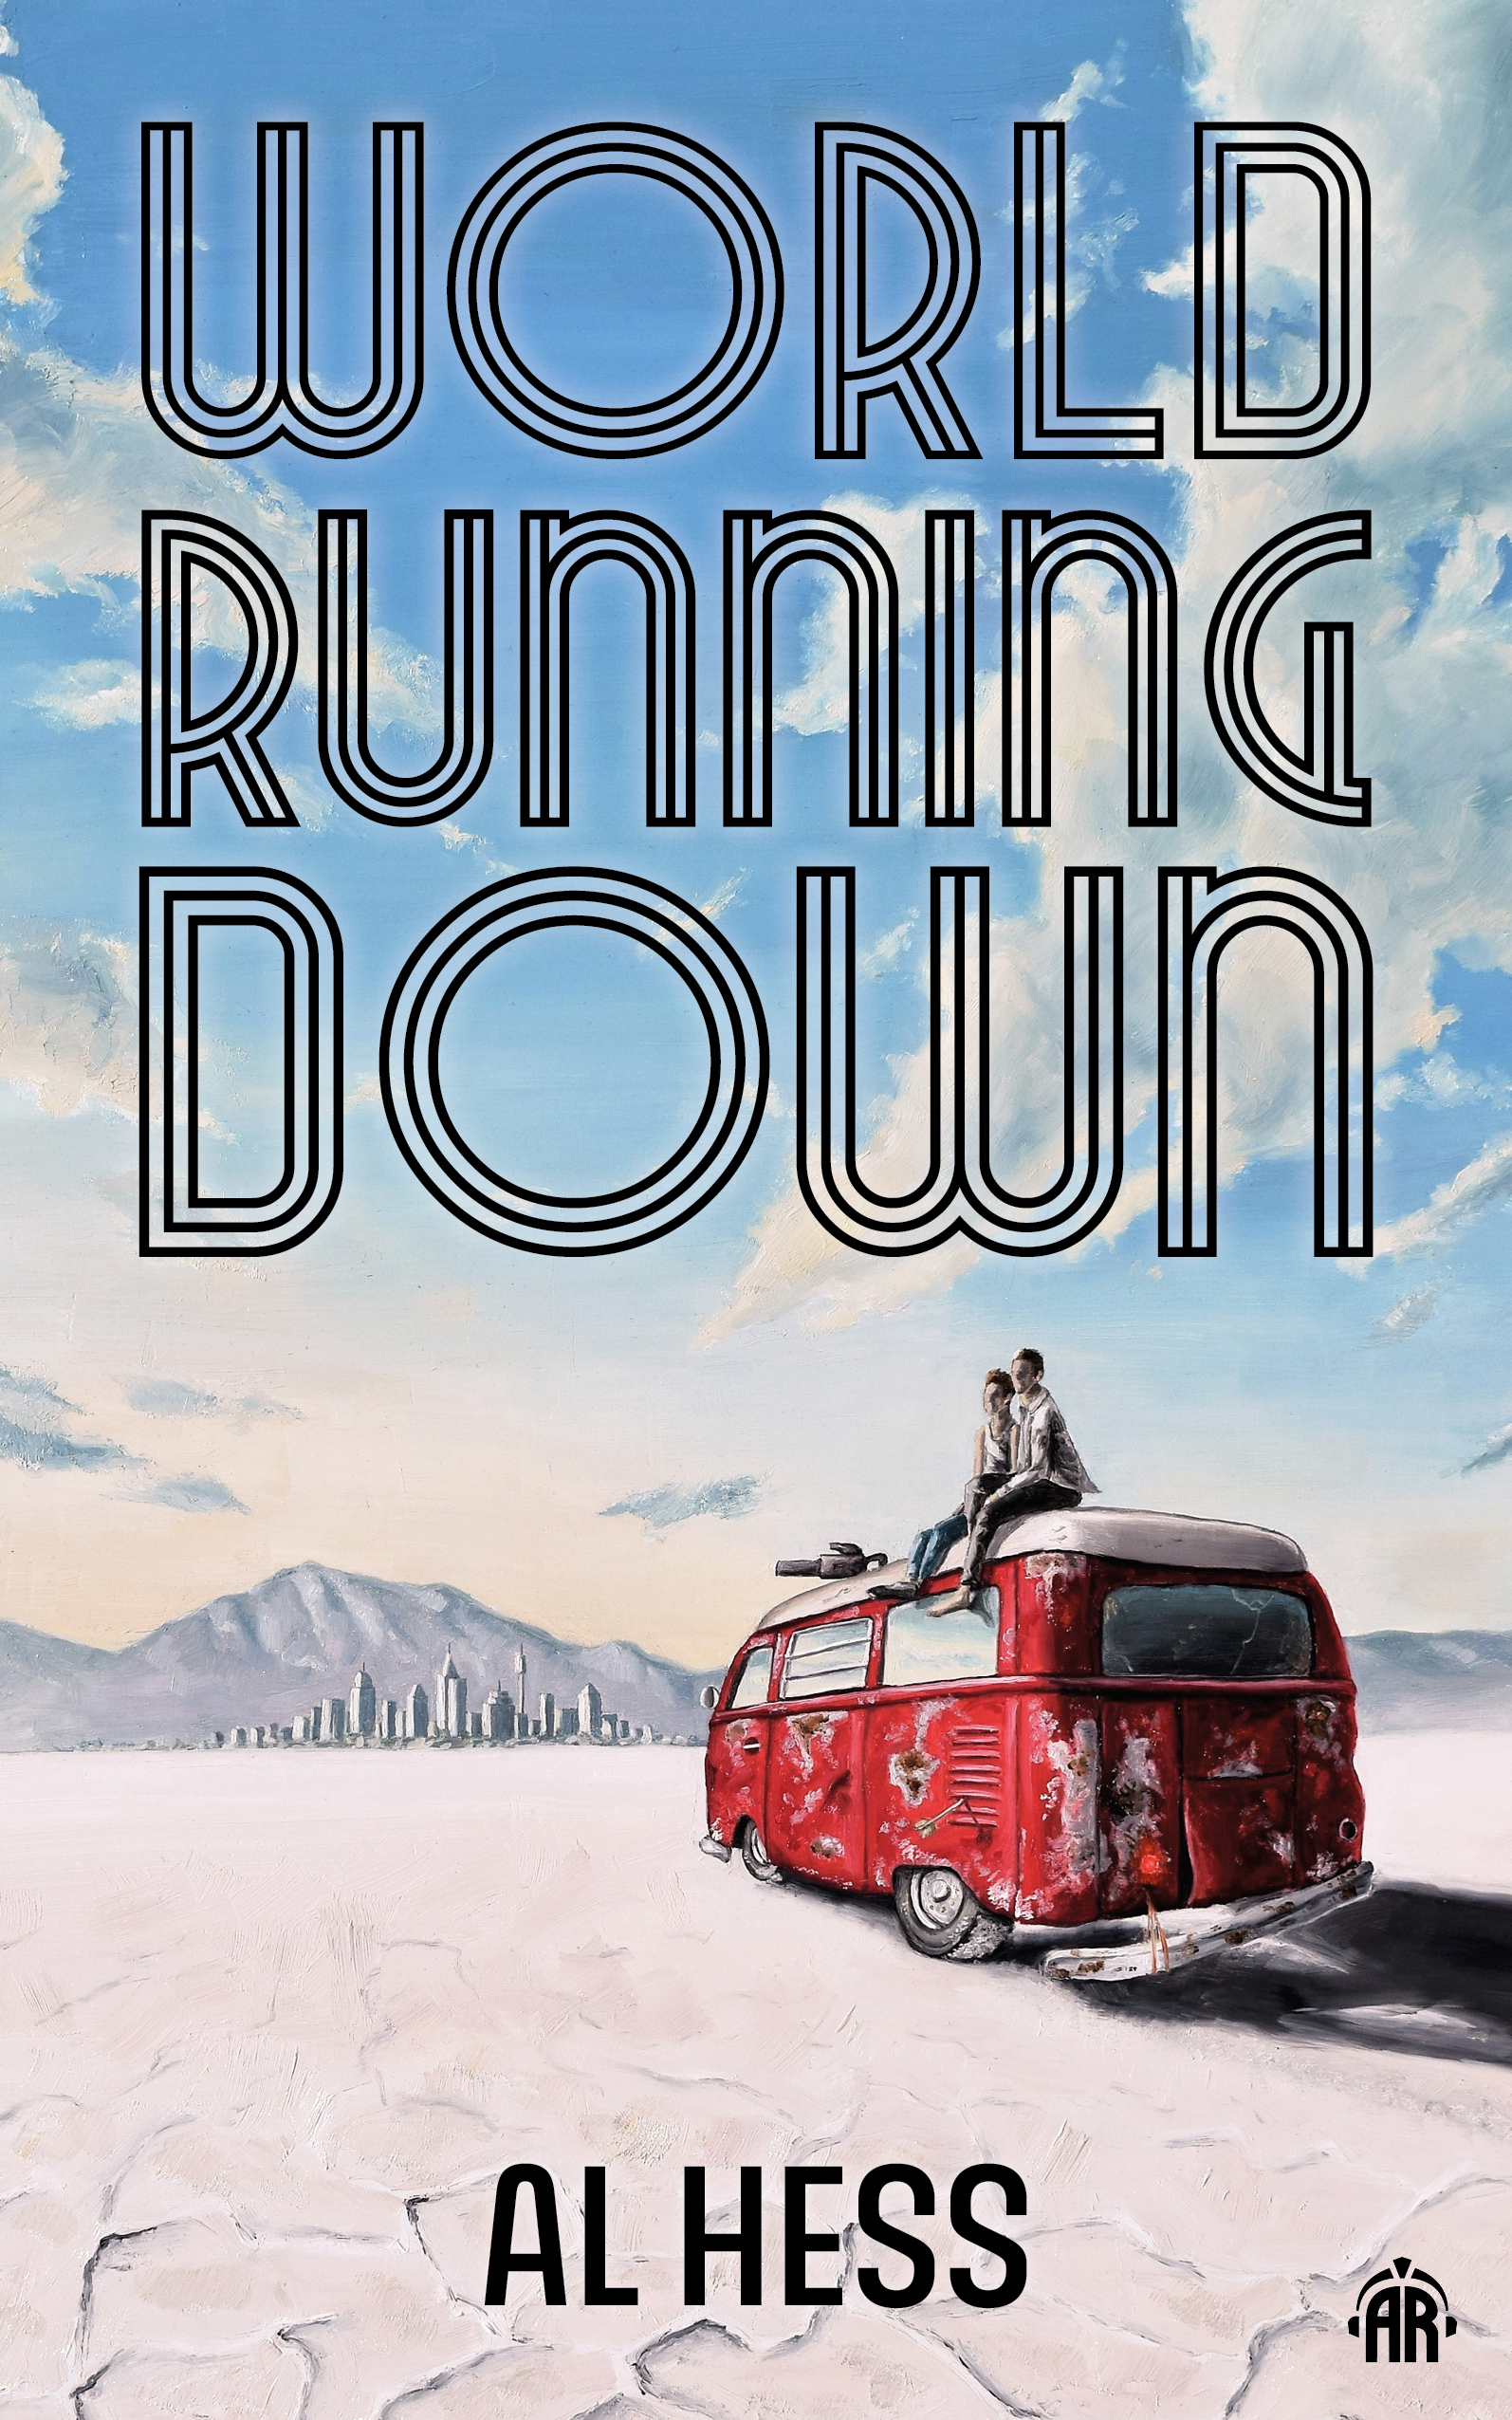 World Running Down by Al Hess - Artwork of two men casually sitting on top of a beat-up red van with their legs dangling off the side, positioned toward the bottom right of the cover. All around them is dry, cracked ground. In the far background toward the left of the cover there's a city with tall buildings, and beyond that is mountains. The sky is blue with some clouds. The vibe is chill. The title takes up the top two-thirds of the cover, in the sky, with black outlined letters.